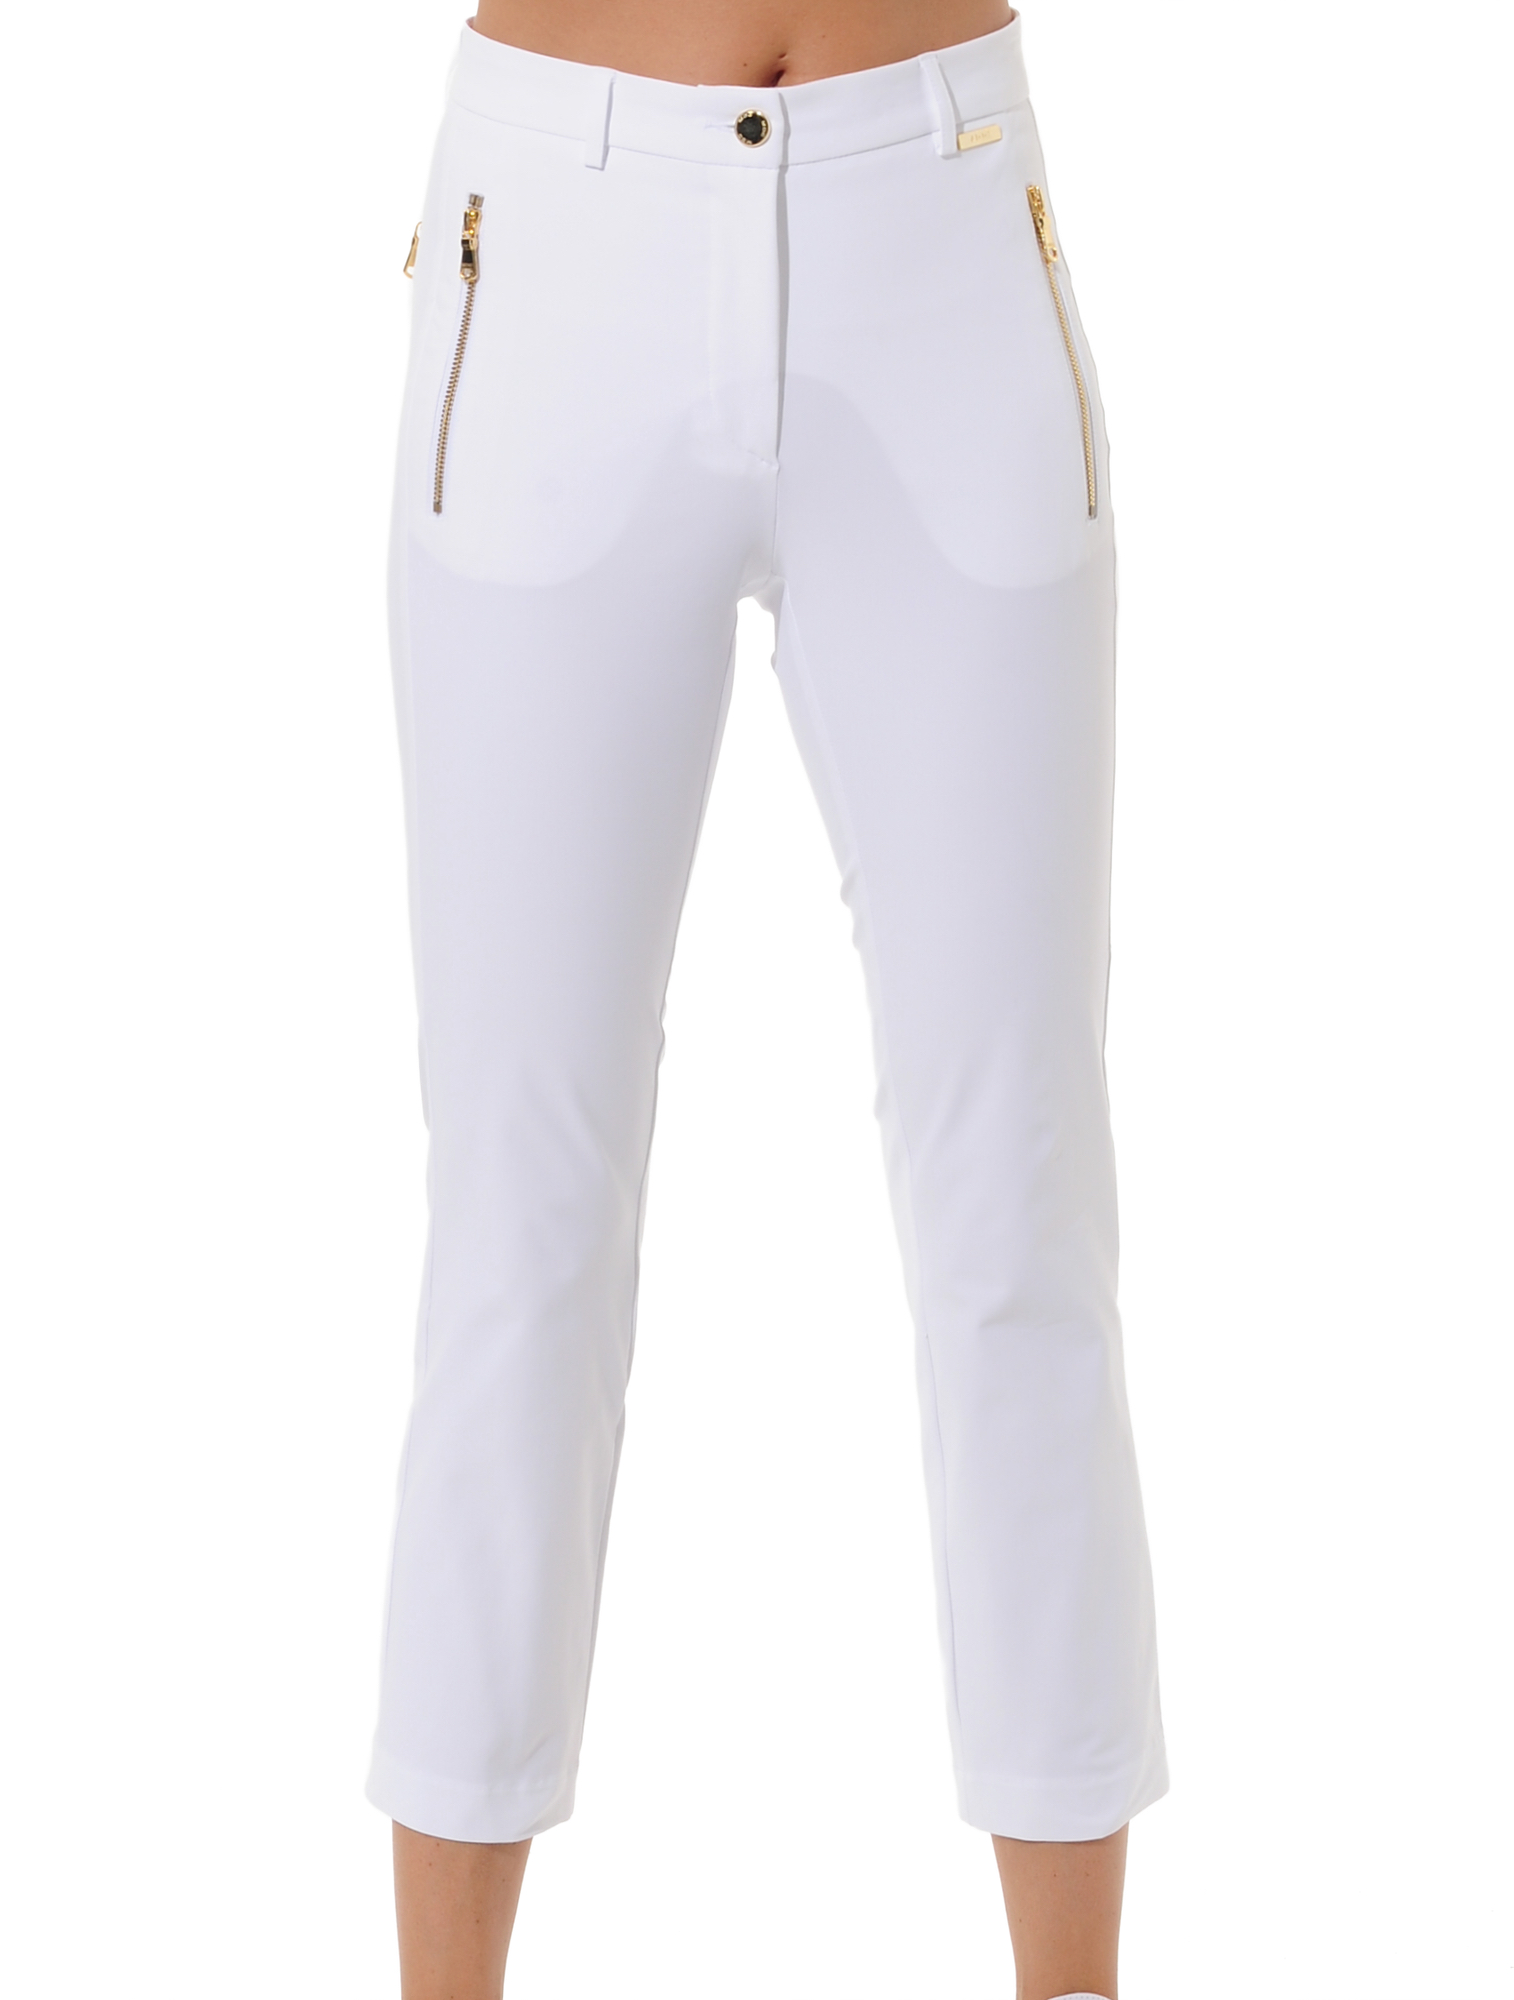 4way stretch cropped chinos white 